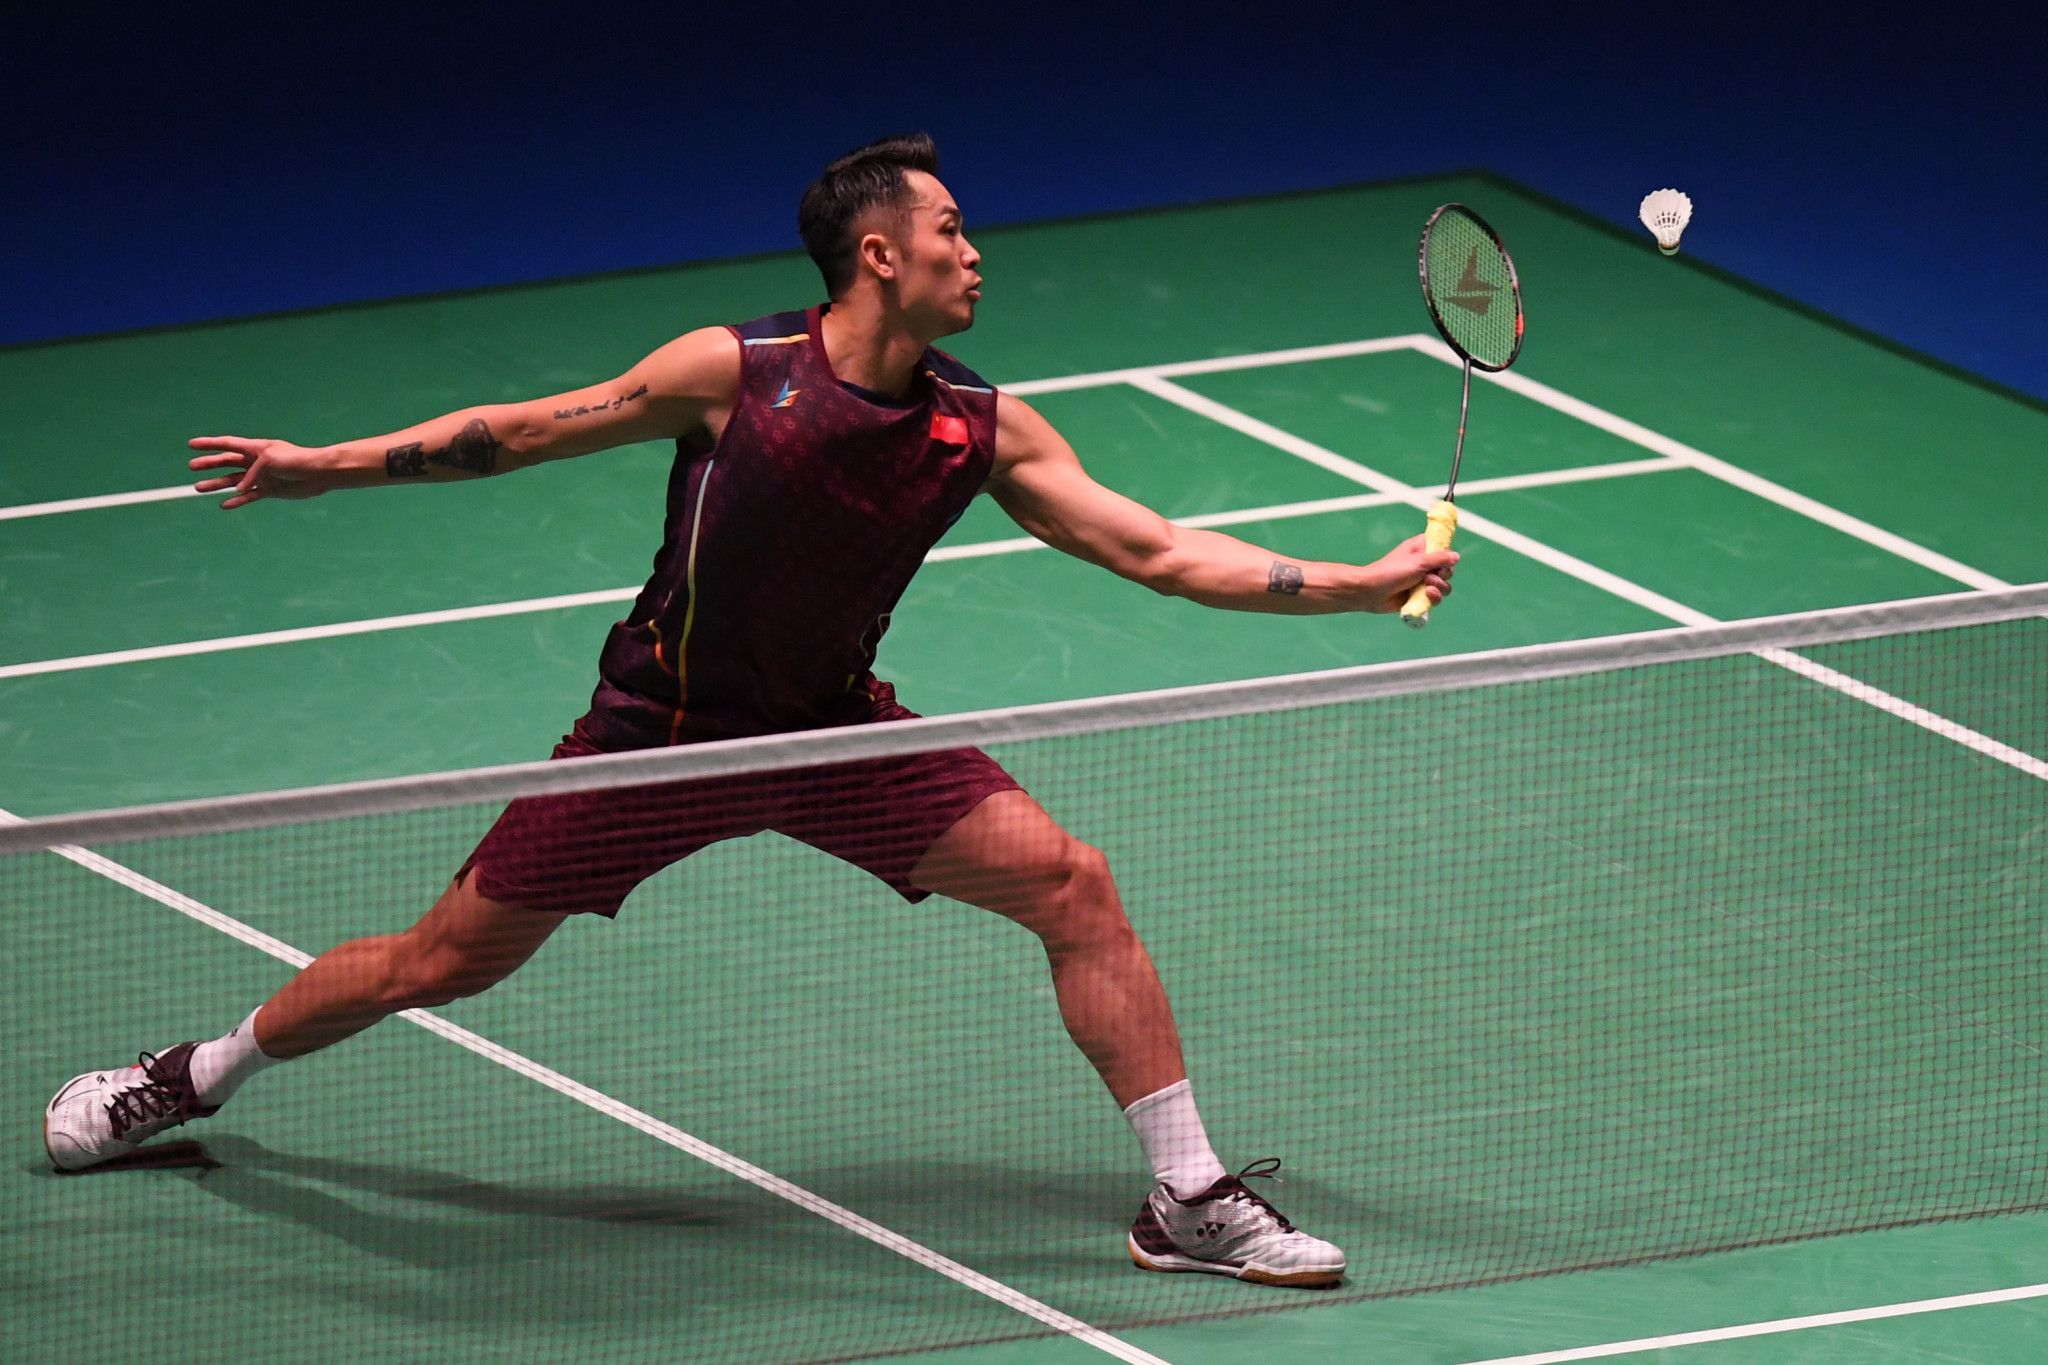 Top seed Lin survives scare to reach second round at BWF Thailand Masters